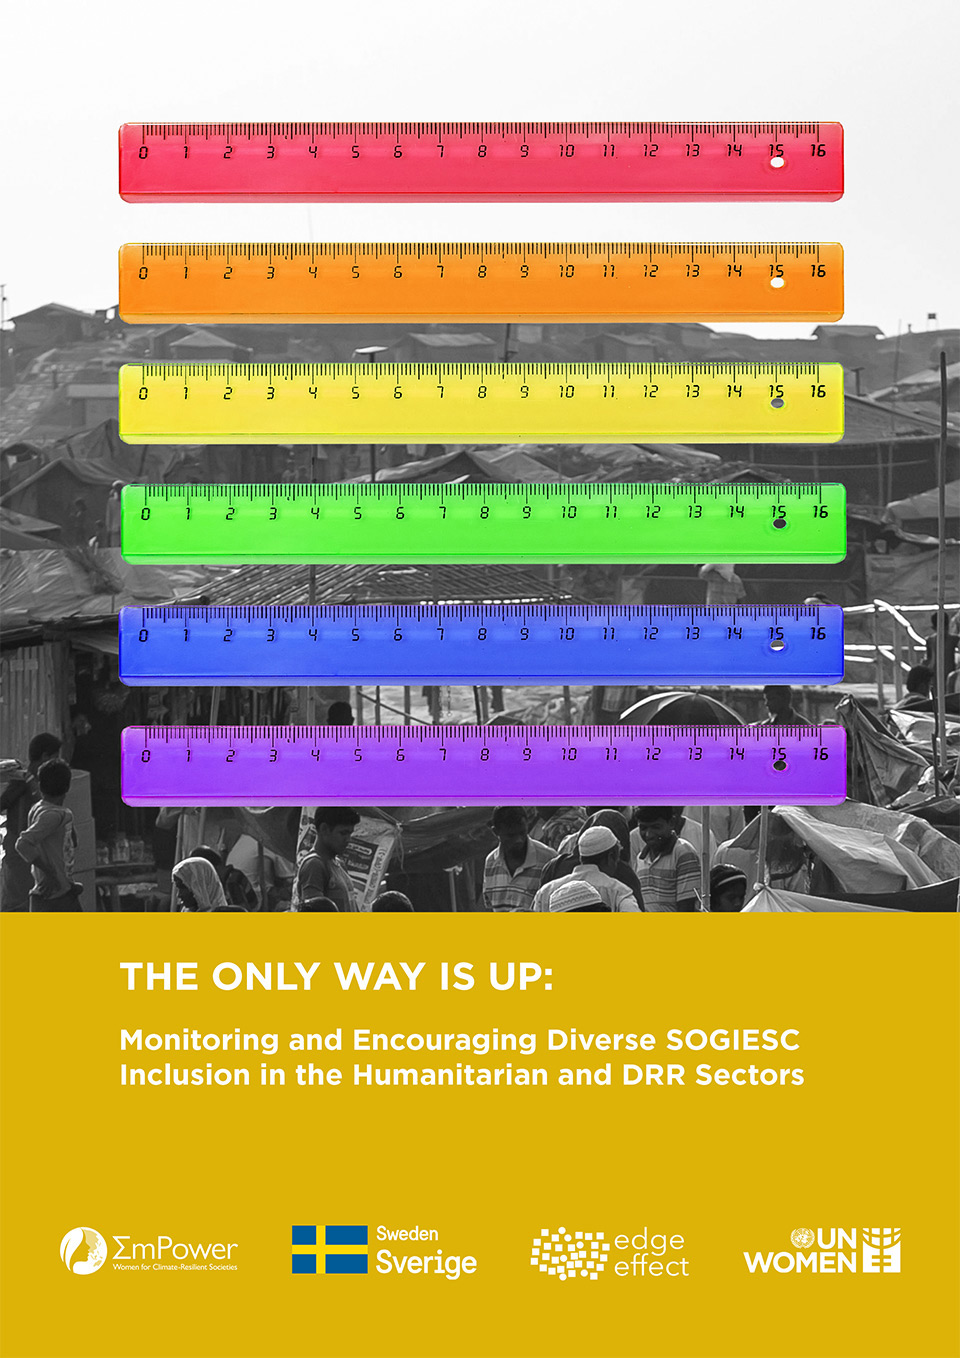 The Only Way is Up: Monitoring and Encouraging Diverse SOGIESC Inclusion in the Humanitarian and DRR Sectors